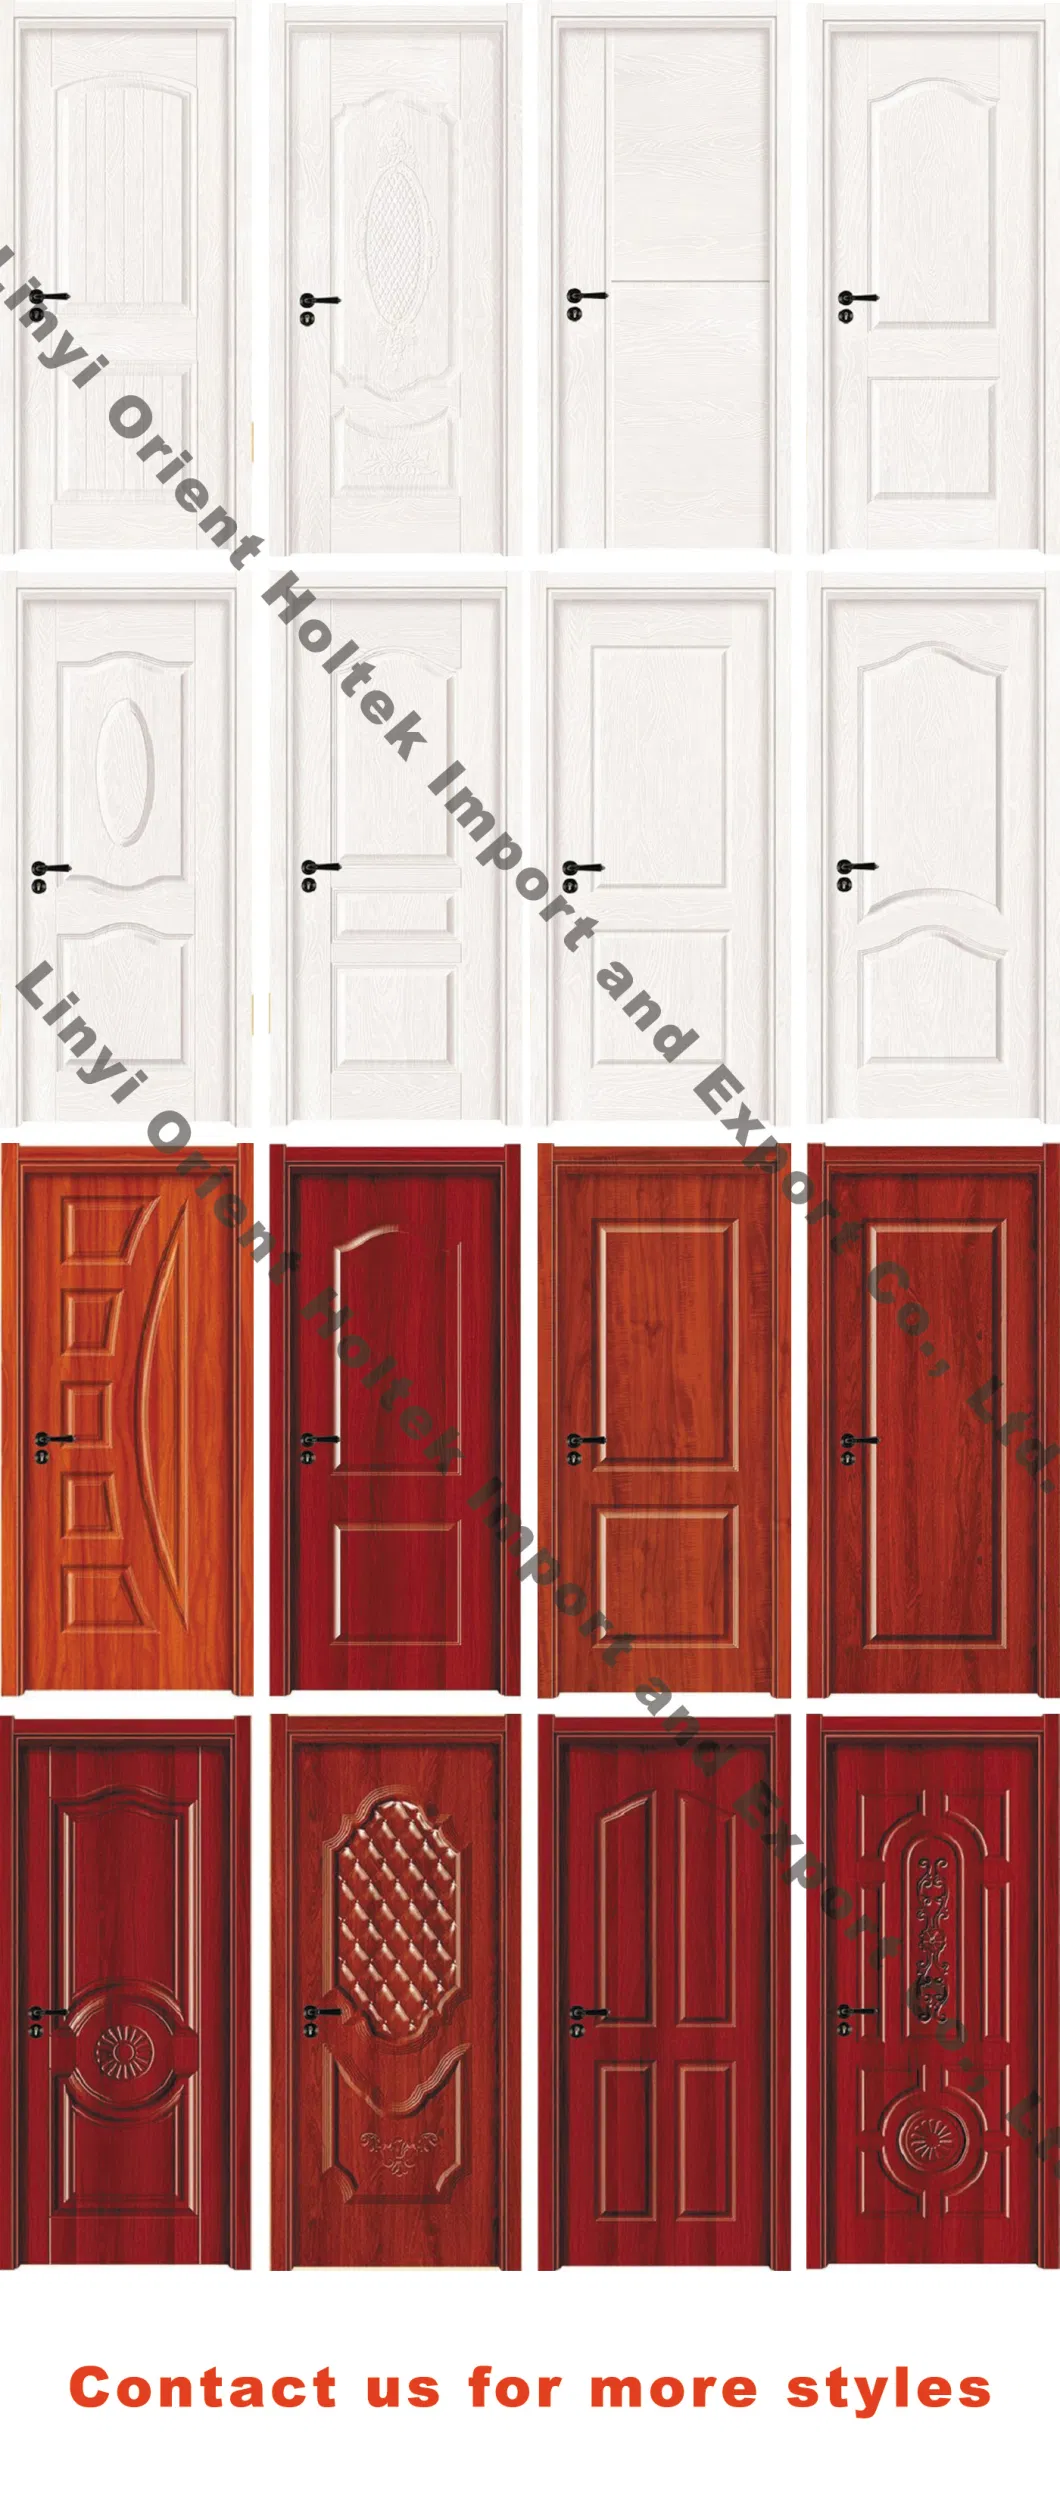 Cheap Melamine Wooden Doors for Houses Interior Soundproof for Office for Toilet Bathroom MDF